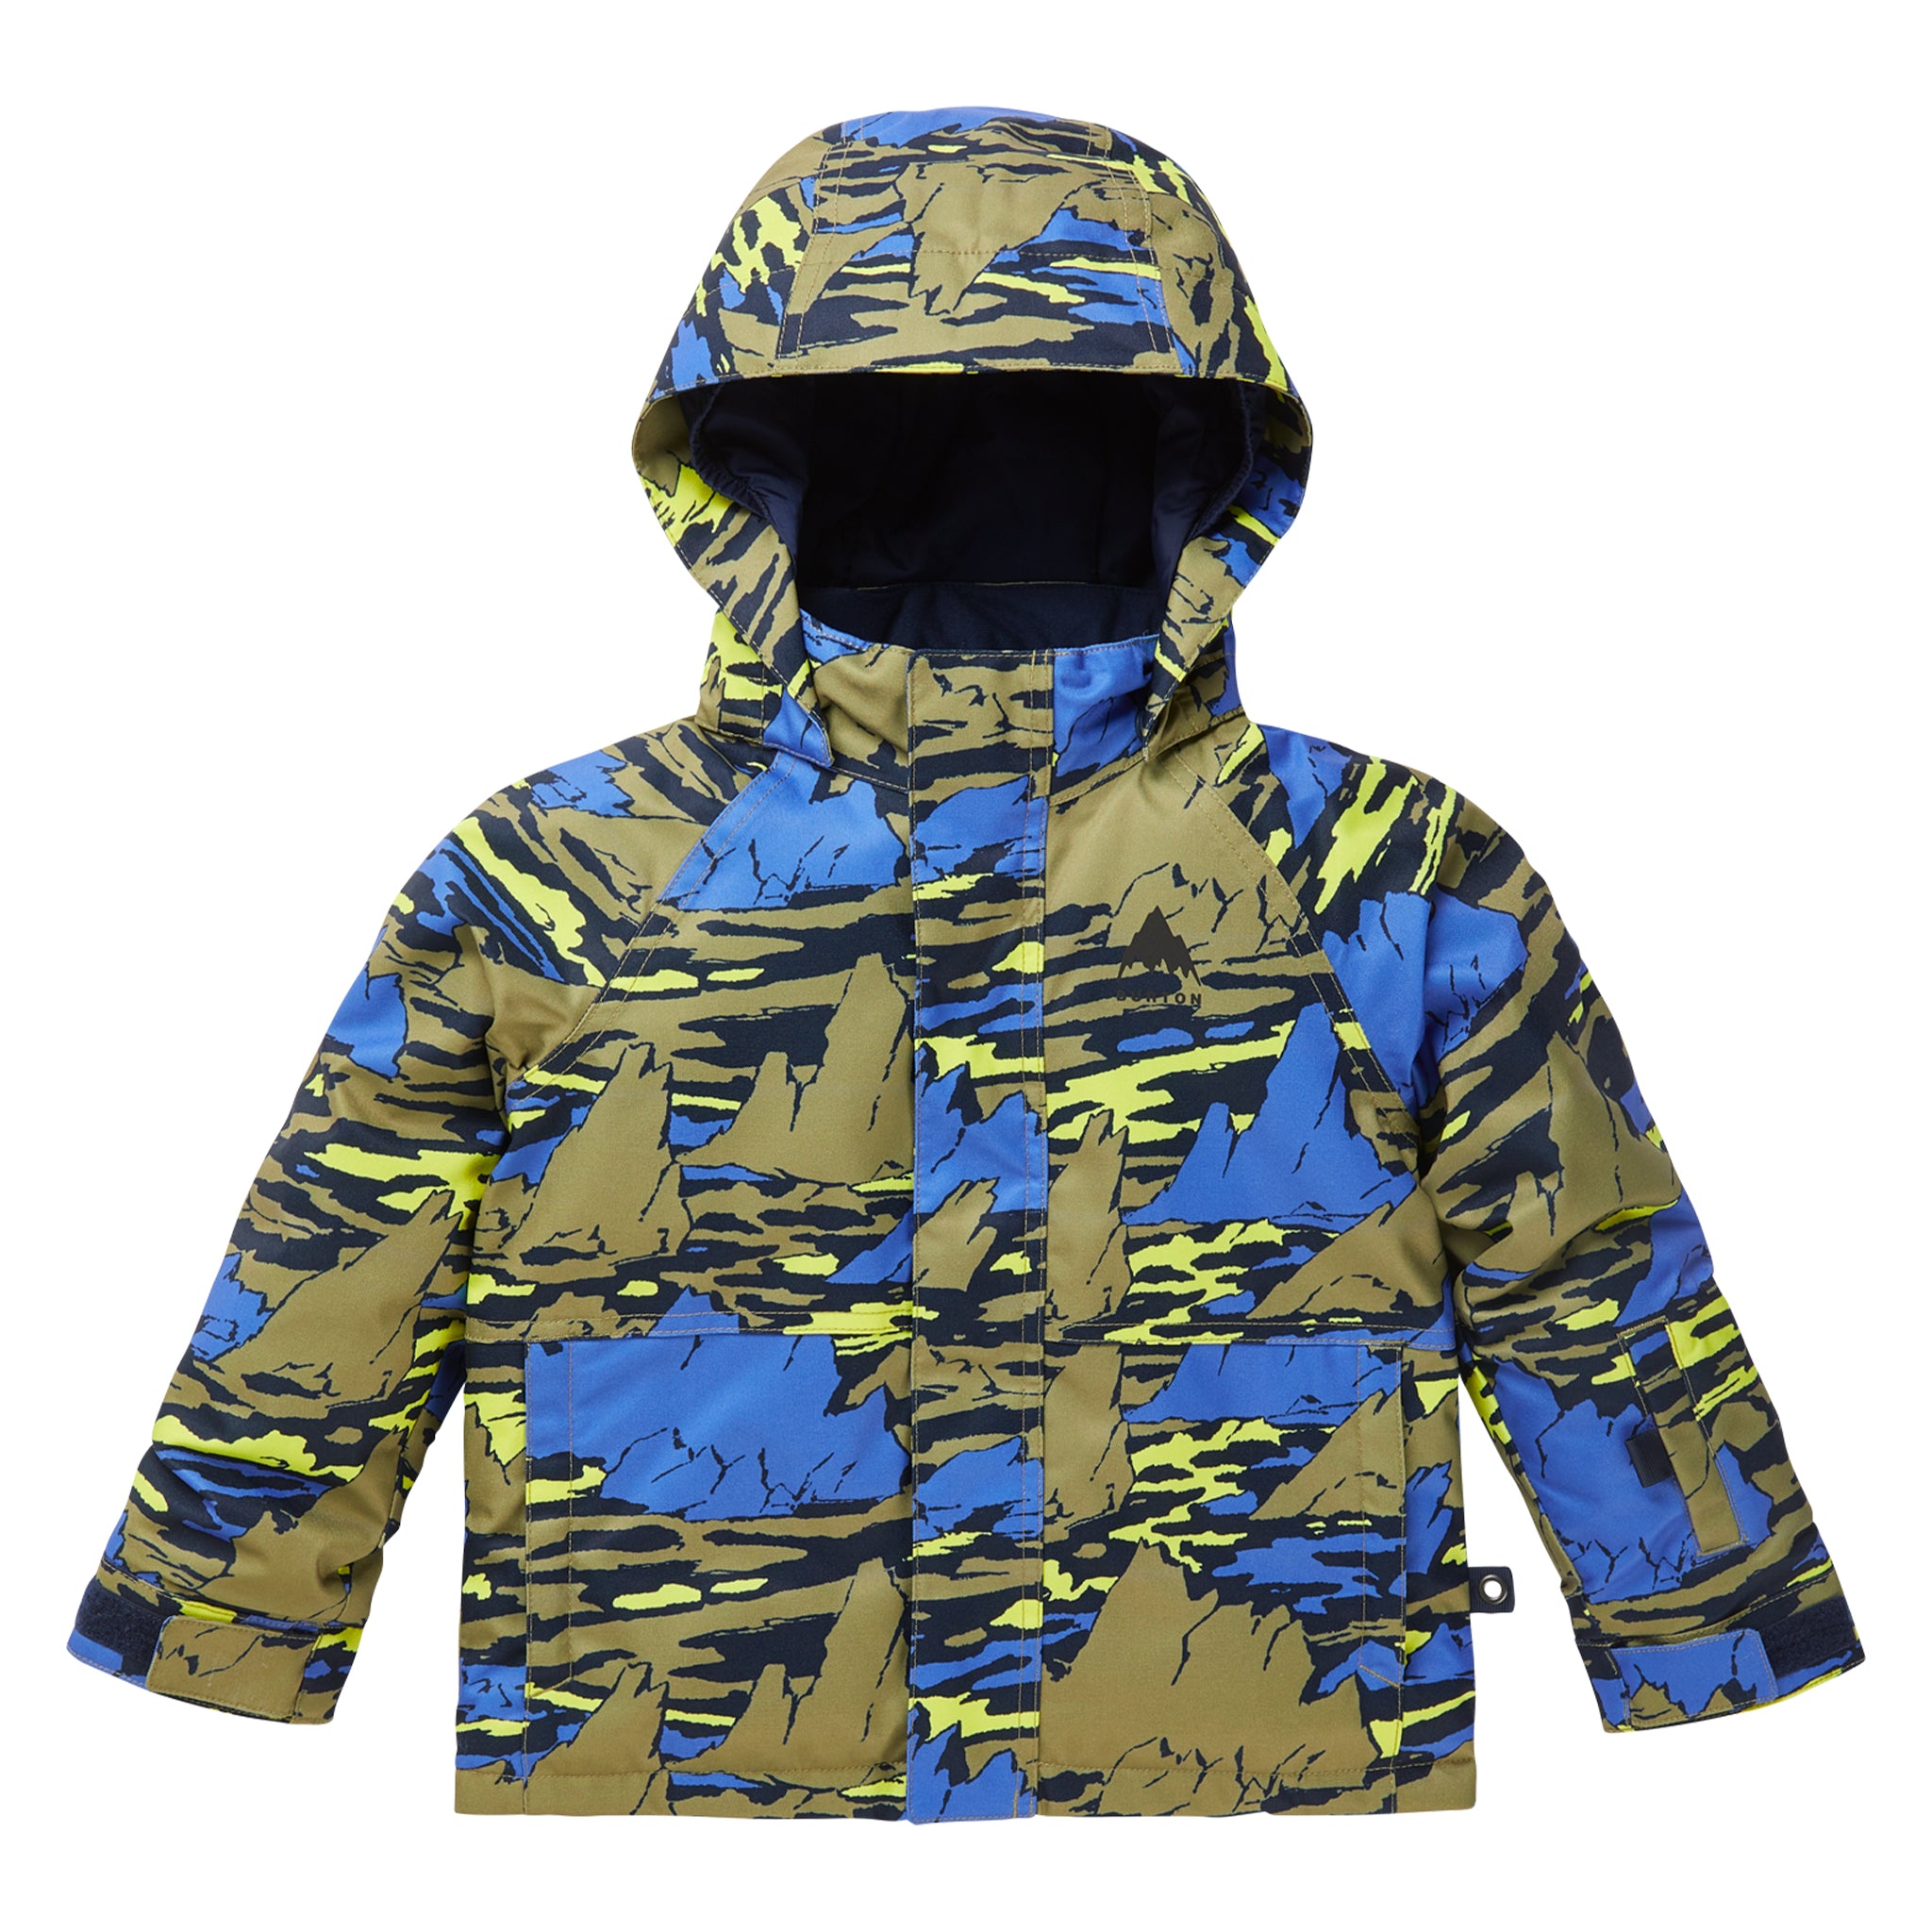 Toddlers' Classic 2L Jacket